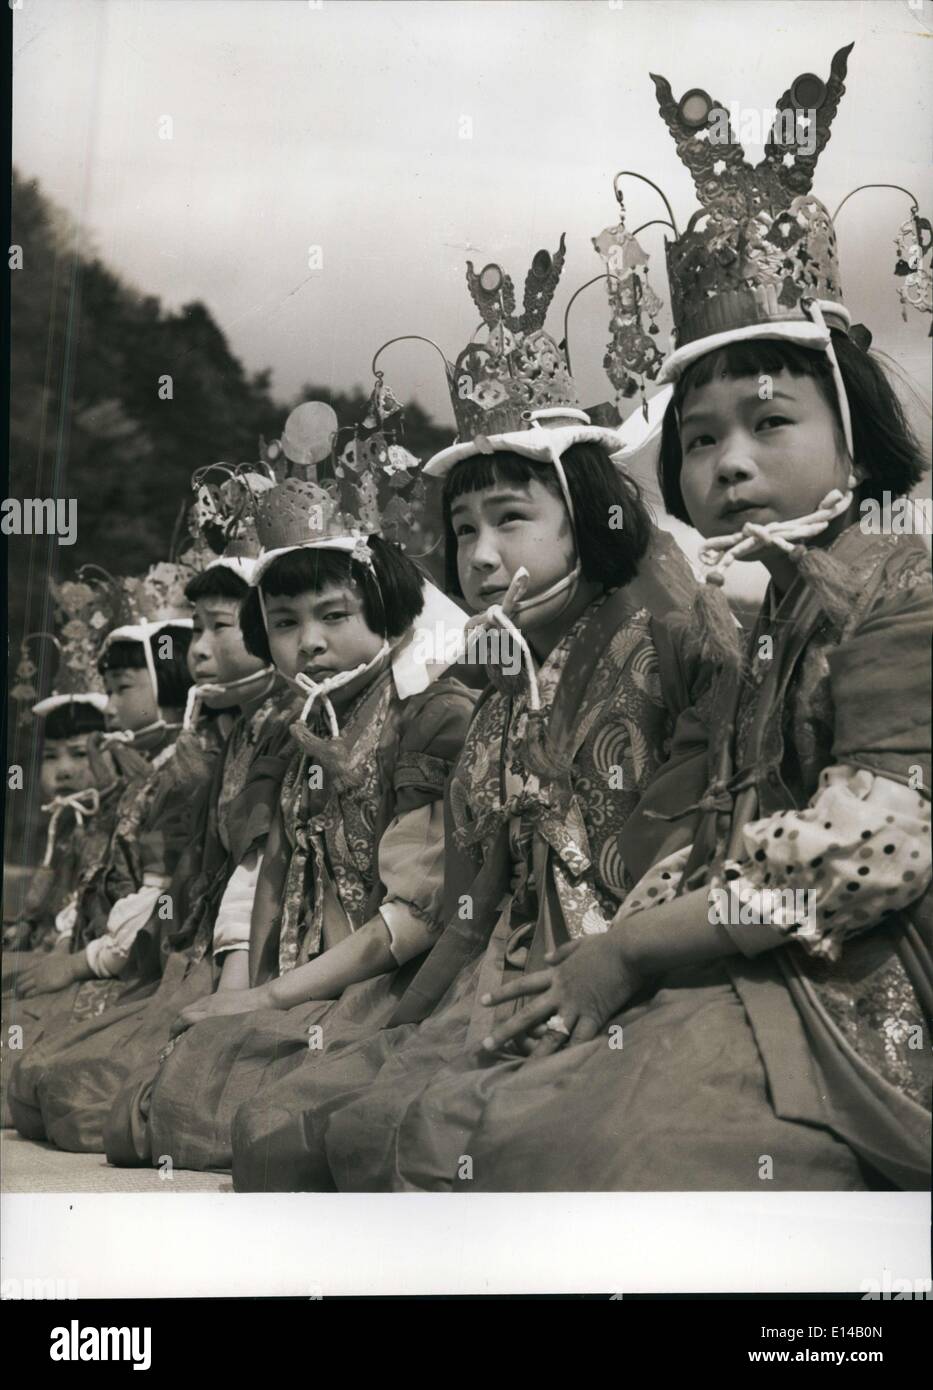 Apr. 17, 2012 - Asian Children Lined Up In Ceremonial Gear Stock Photo